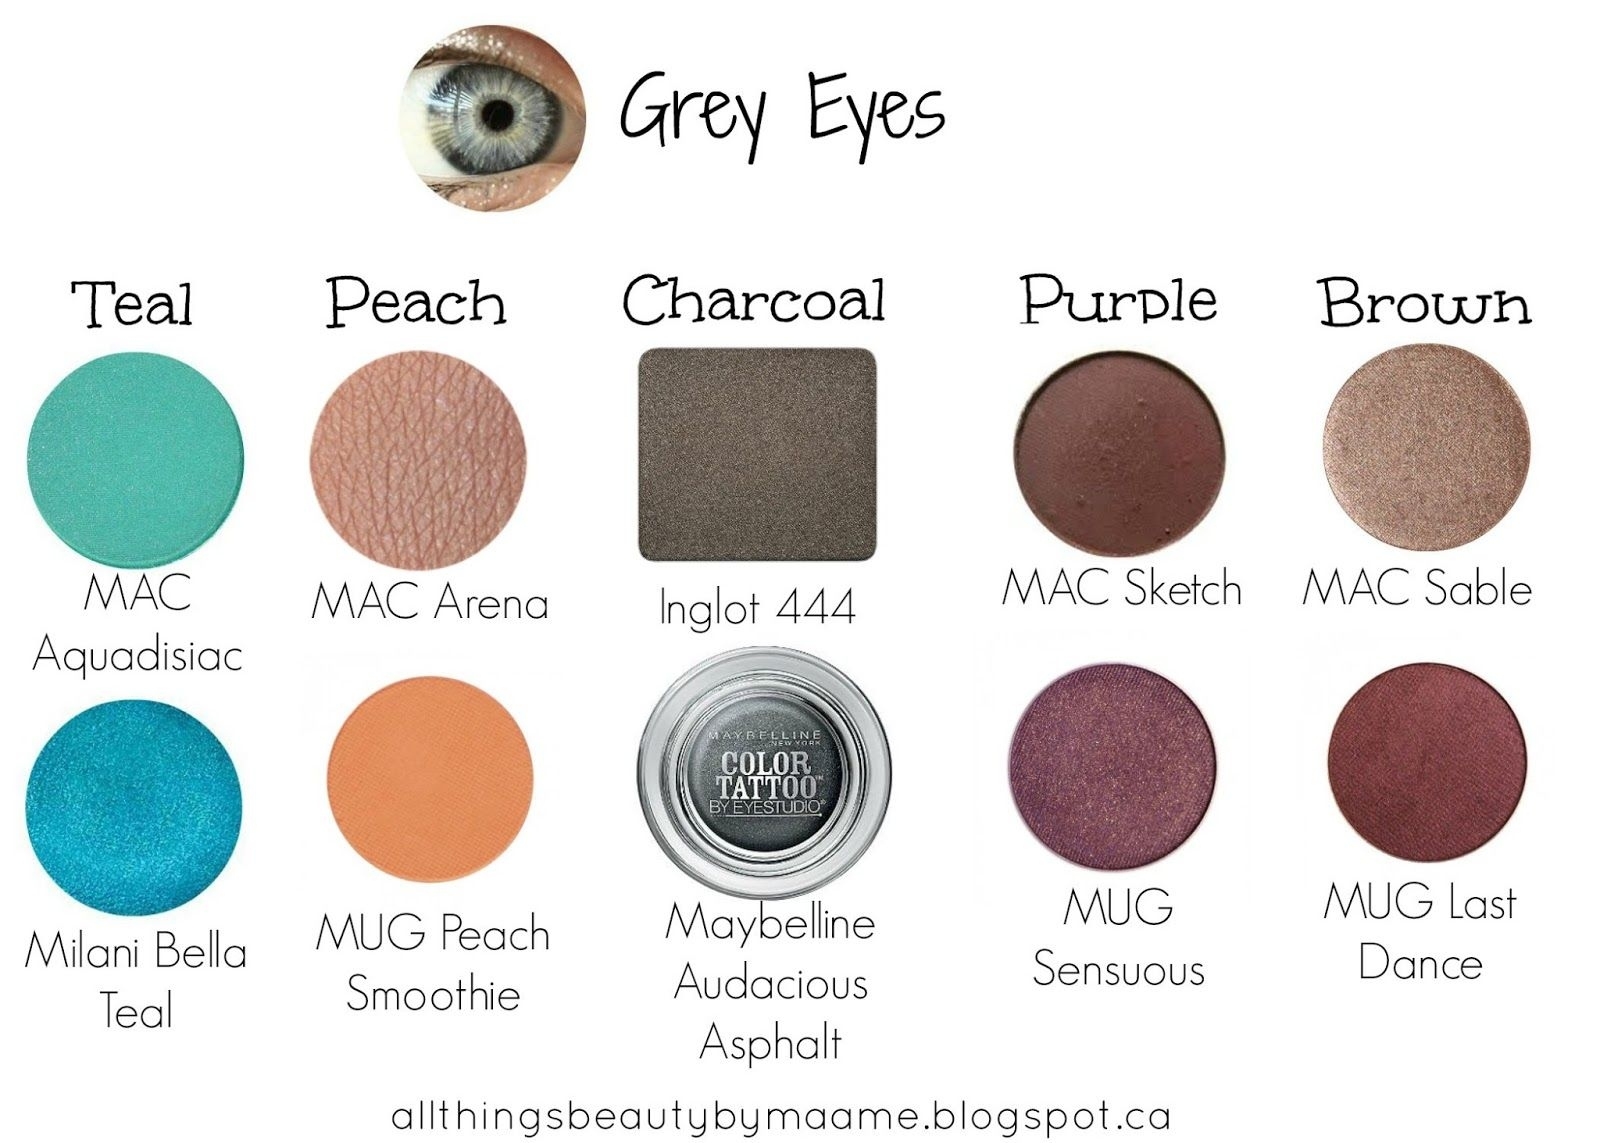 Pin By Ashley Marie On Makeup | Beauty Guide, Eye Color, Eye Makeup with regard to Eyeshadow Colors For Blue Gray Eyes